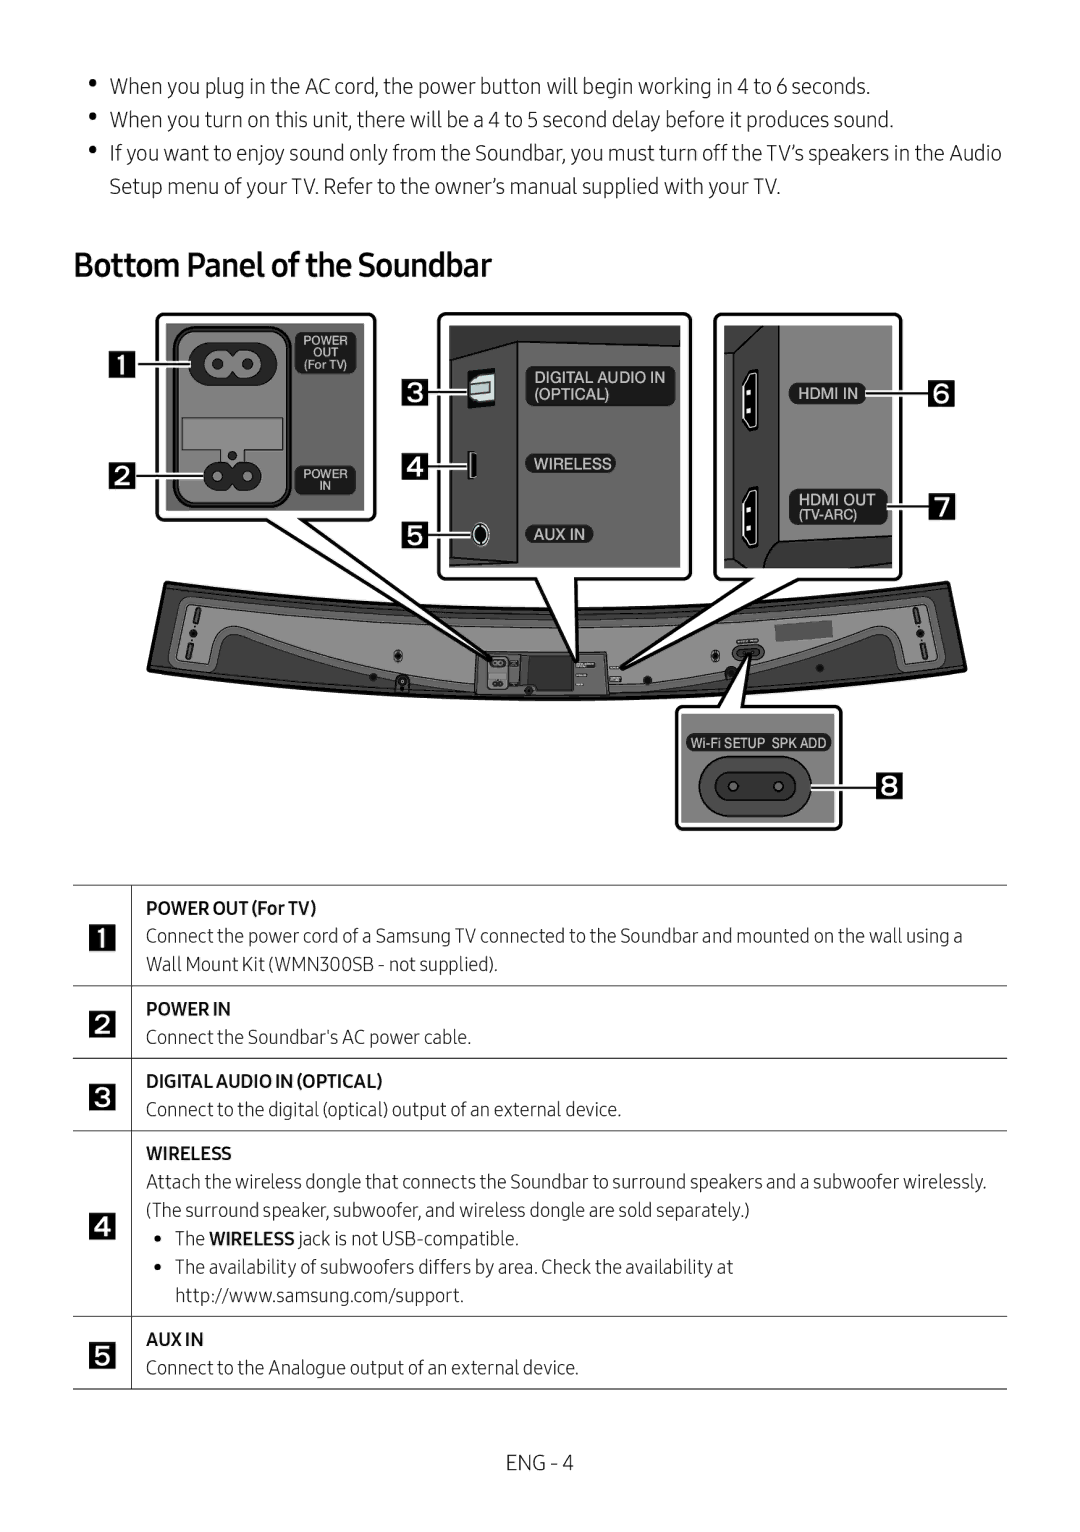 Samsung HW-MS6501/EN, HW-MS6500/ZG, HW-MS6500/EN, HW-MS6501/ZG, HW-MS6501/ZF Bottom Panel of the Soundbar, Power OUT For TV 